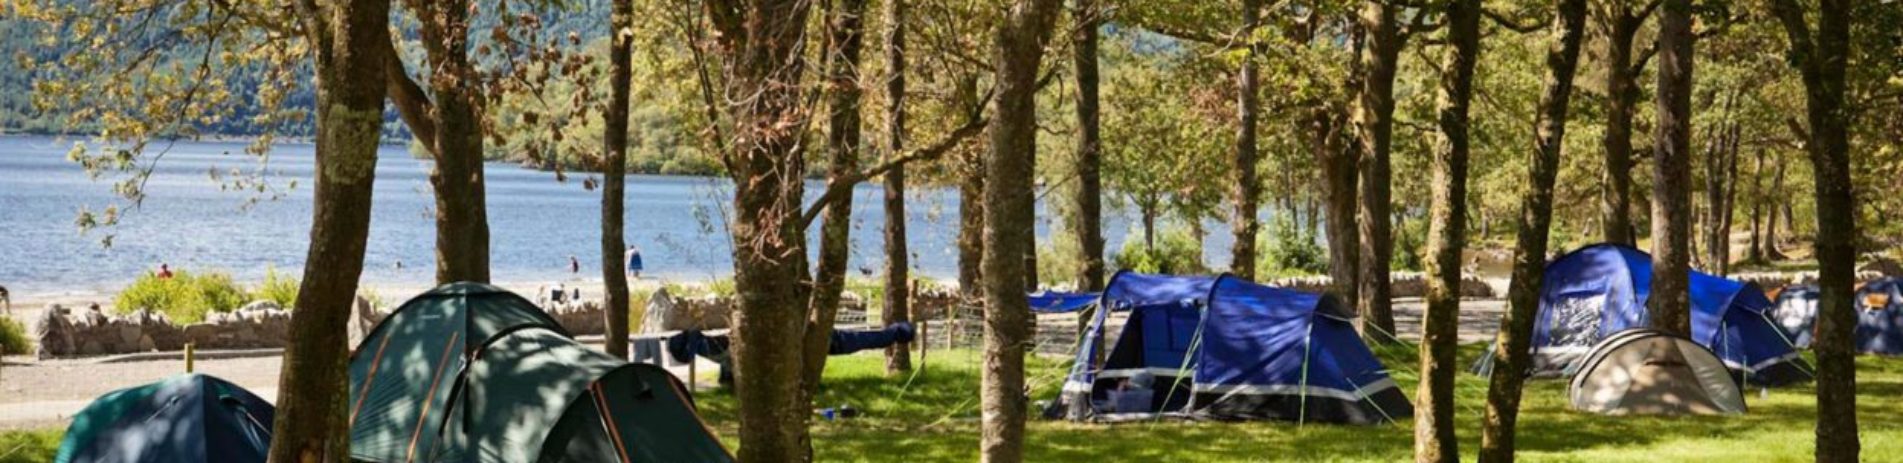 tents-pitched-at-the-edge-of-forest-at-salloch-bay-on-loch-lomond